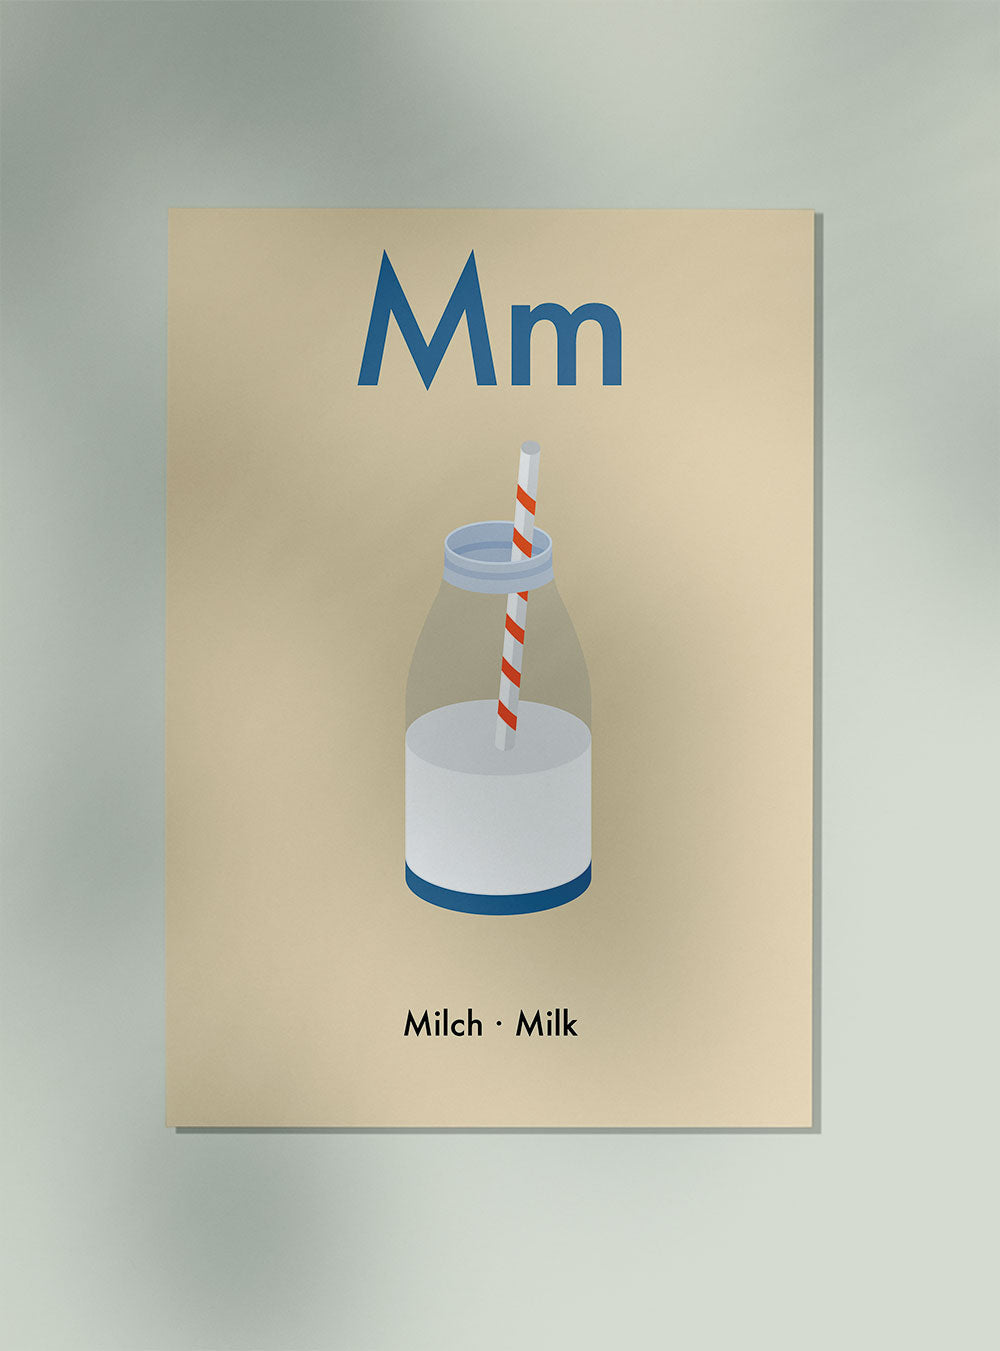 M for Milk - Children's Alphabet Poster in German and English